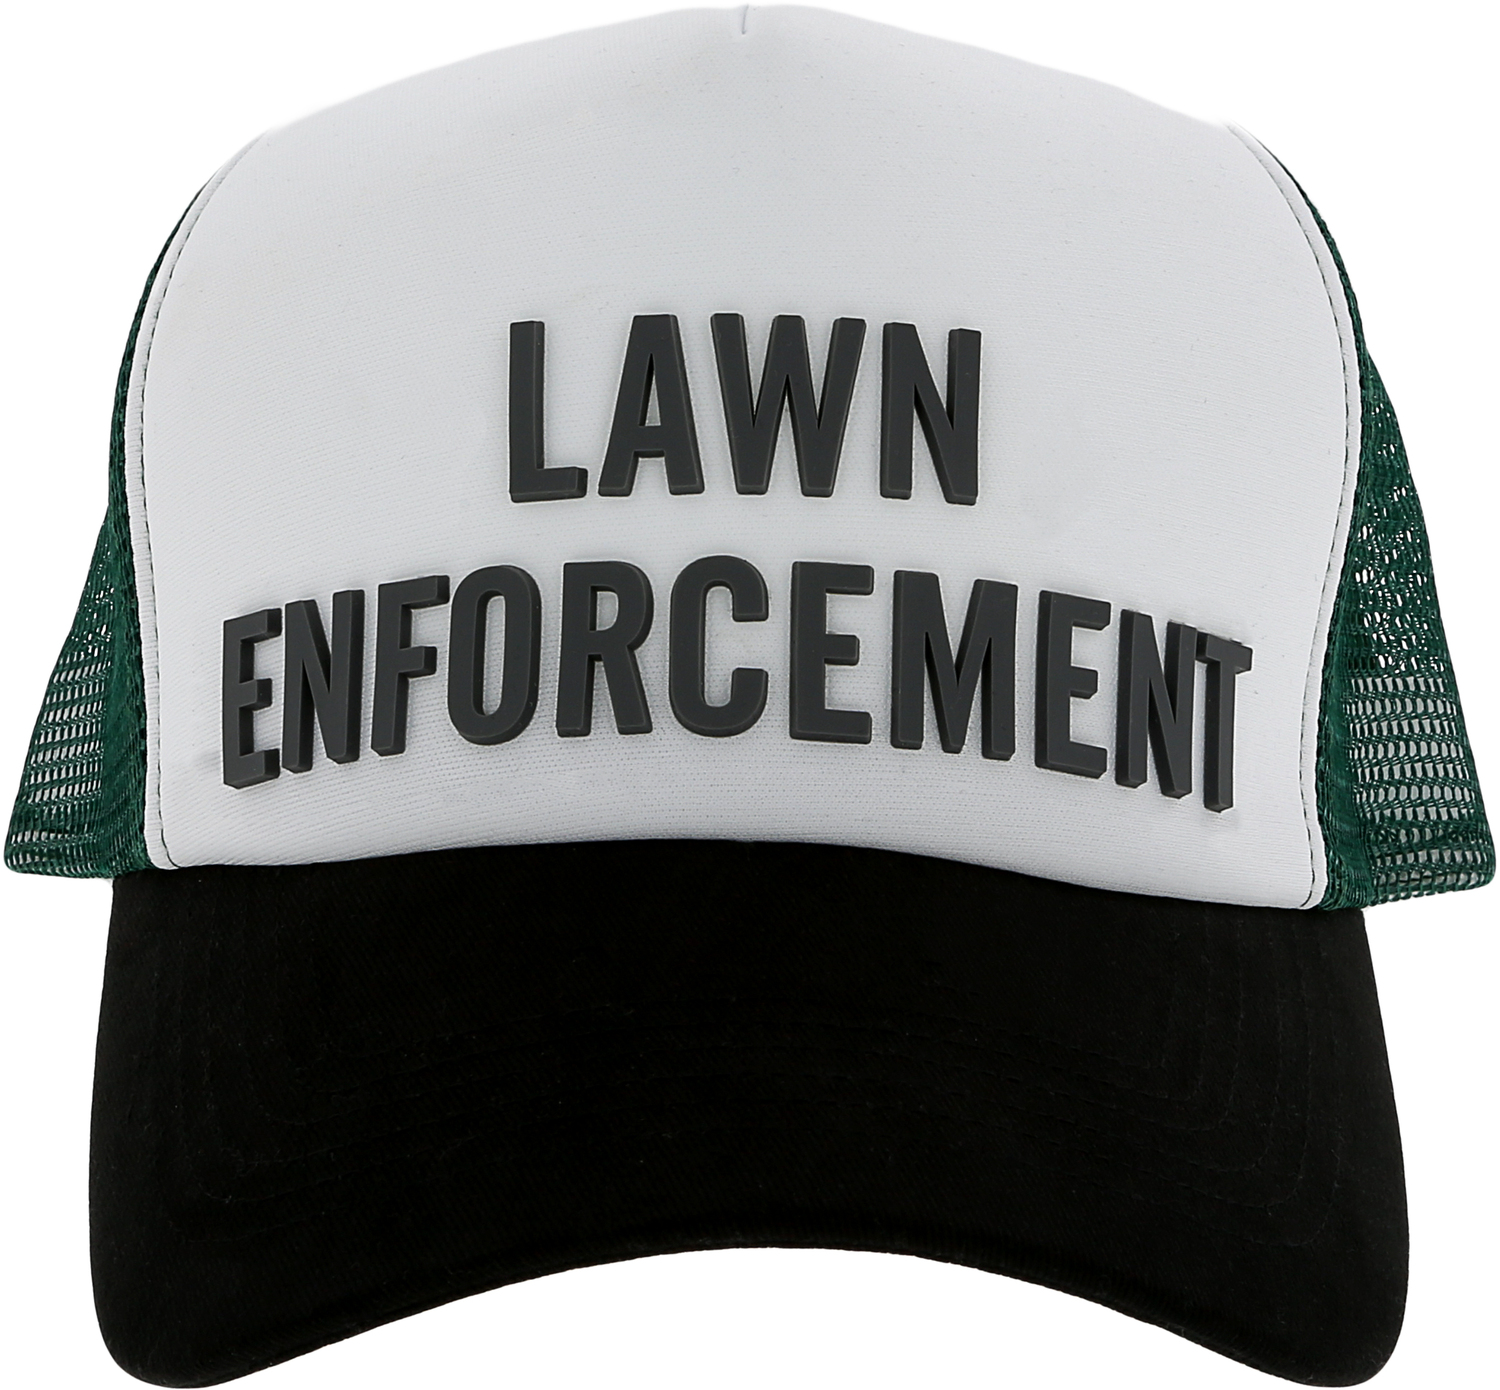 Lawn by Man Made - Lawn - Green Mesh Adjustable Trucker Hat